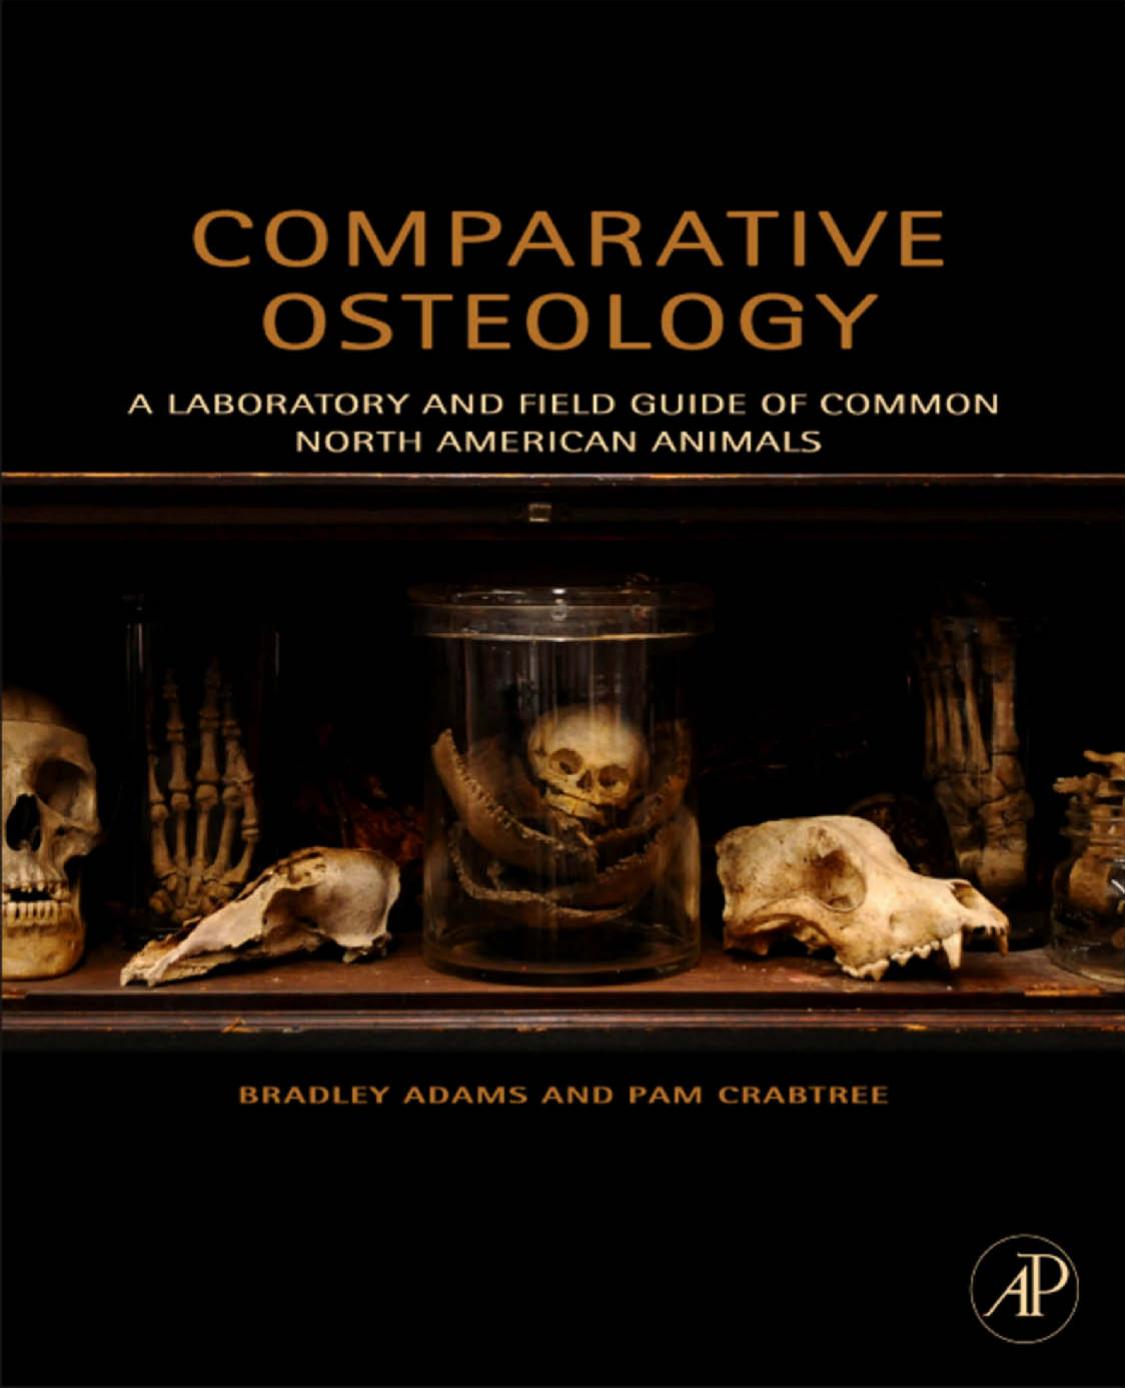 Comparative Osteology, A Laboratory and Field Guide of Common North American Animals